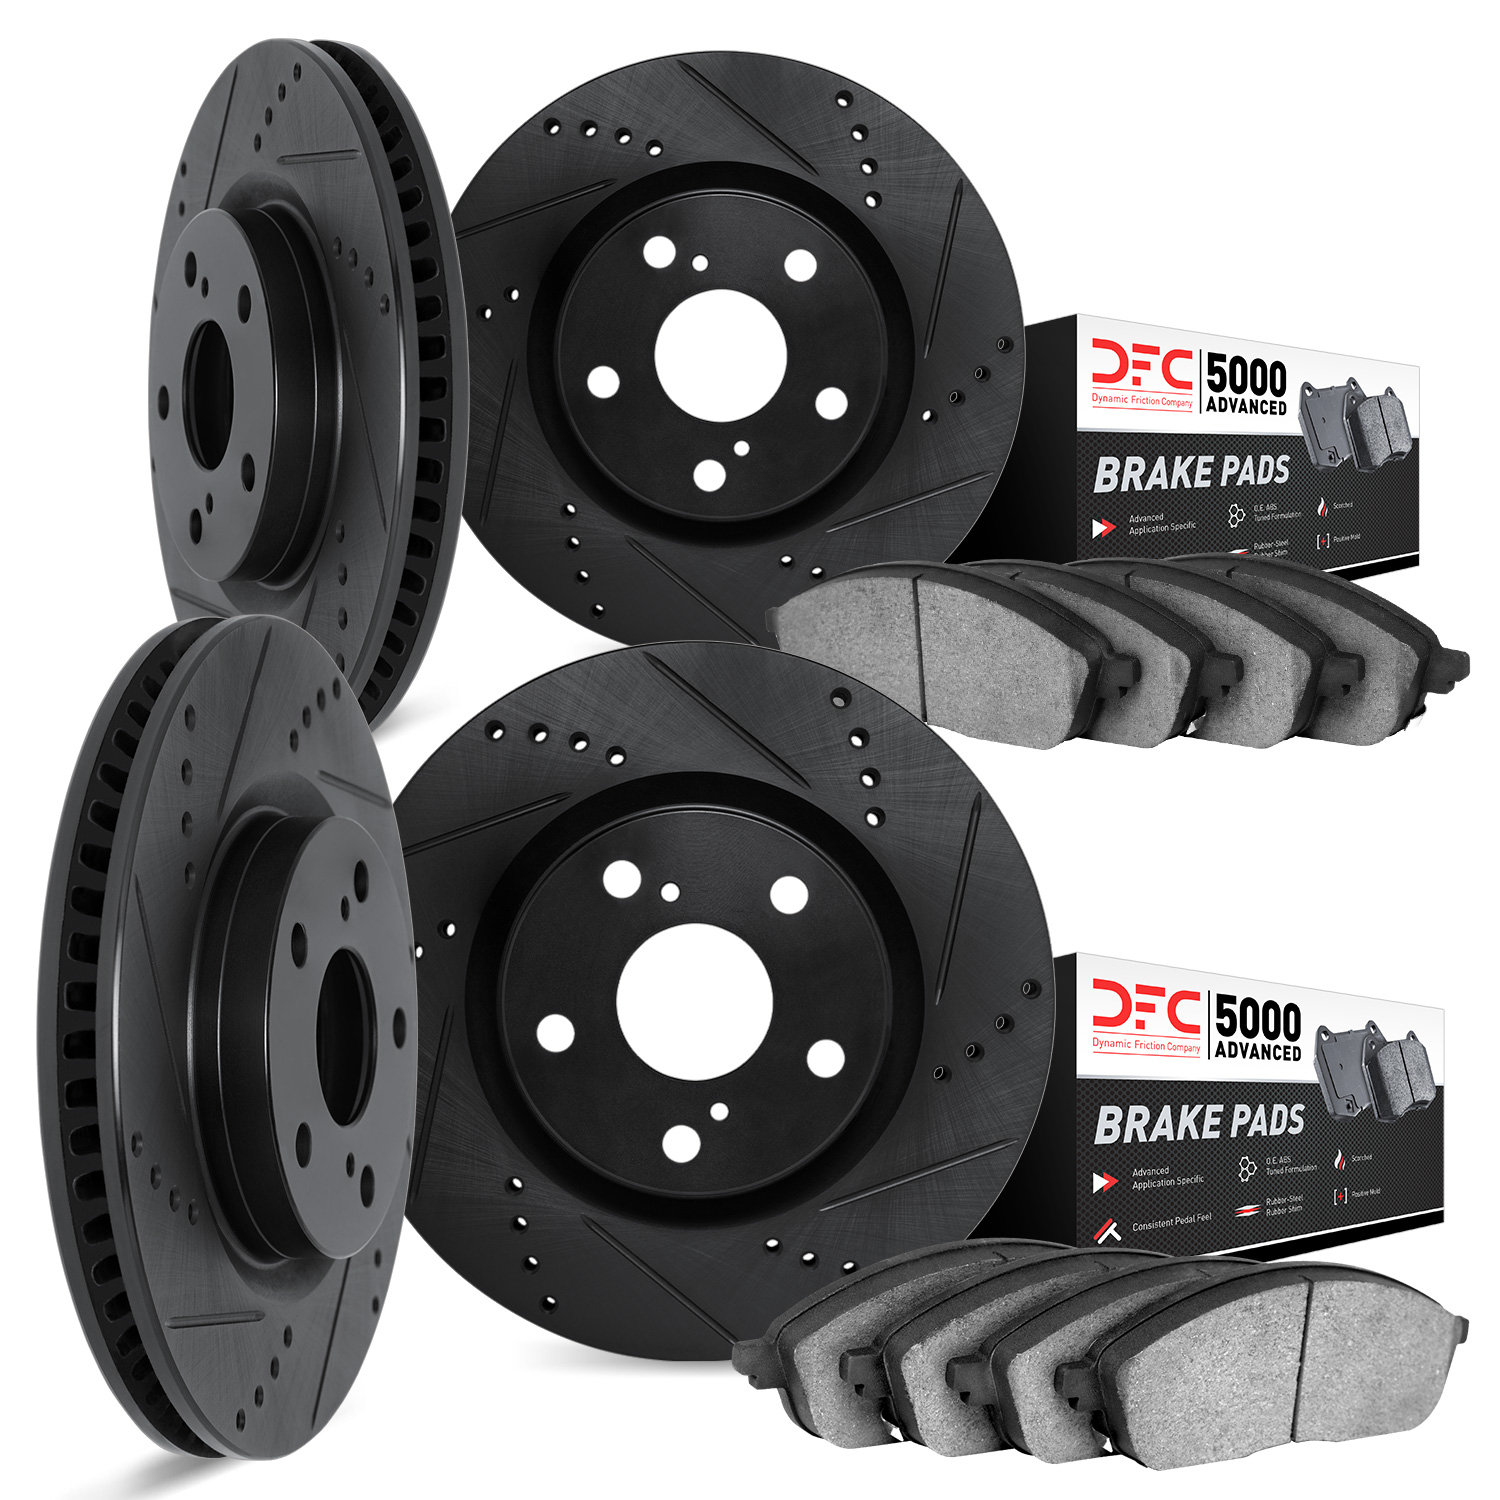 8504-74080 Drilled/Slotted Brake Rotors w/5000 Advanced Brake Pads Kit [Black], 2004-2007 Audi/Volkswagen, Position: Front and R